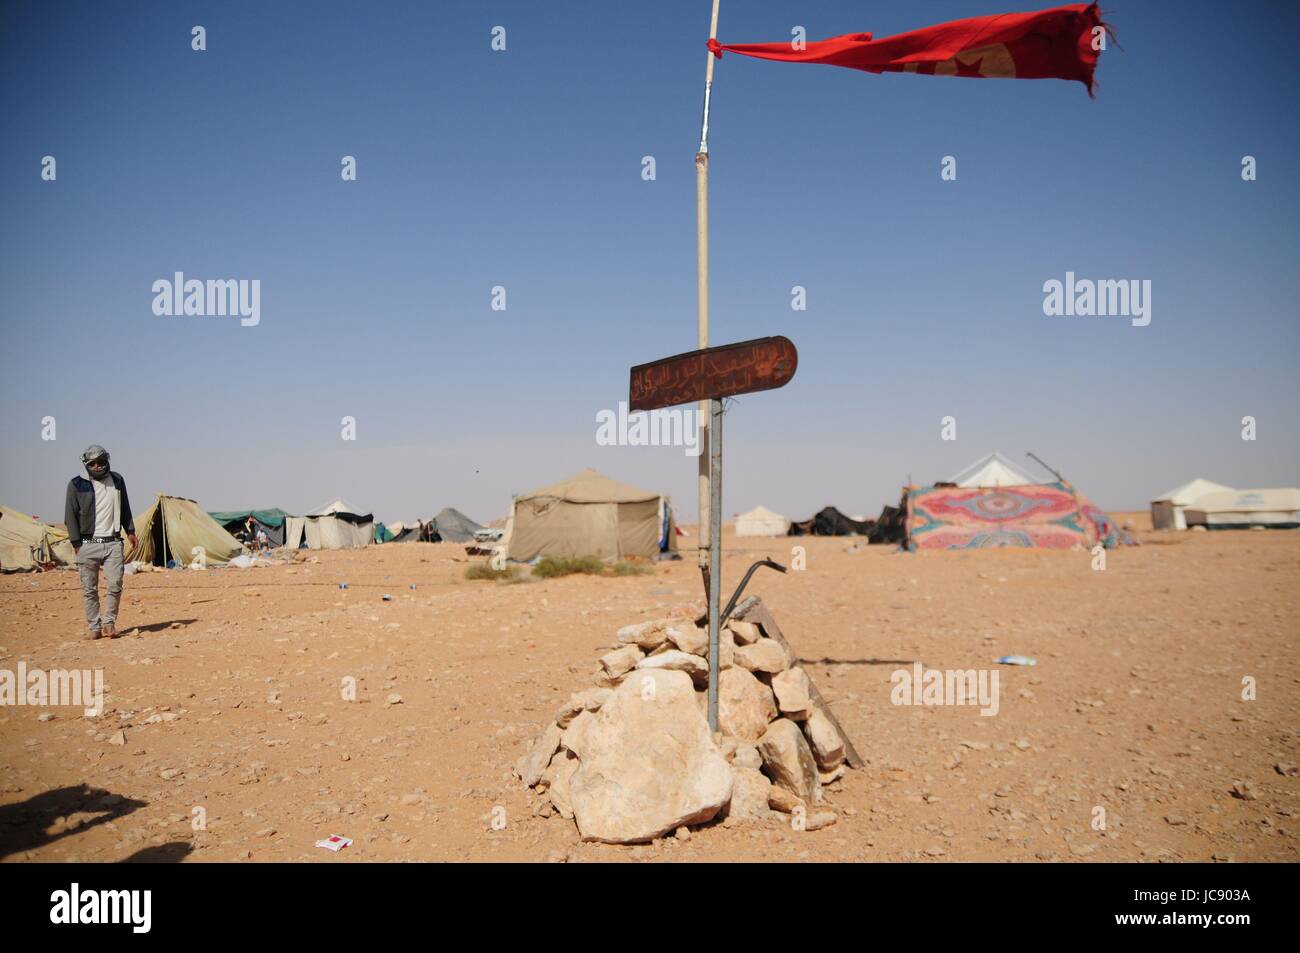 El-Kamour, Tunisia. 26th May, 2017. A protest camp near an oil pumping station in El-Kamour, Tunisia, 26 May 2017. Rural Moroccans and Tunisians who feel that they have been abandoned by their central governments have been protesting in growing numbers over the last couple of weeks. Photo: Simon Kremer/dpa/Alamy Live News Stock Photo